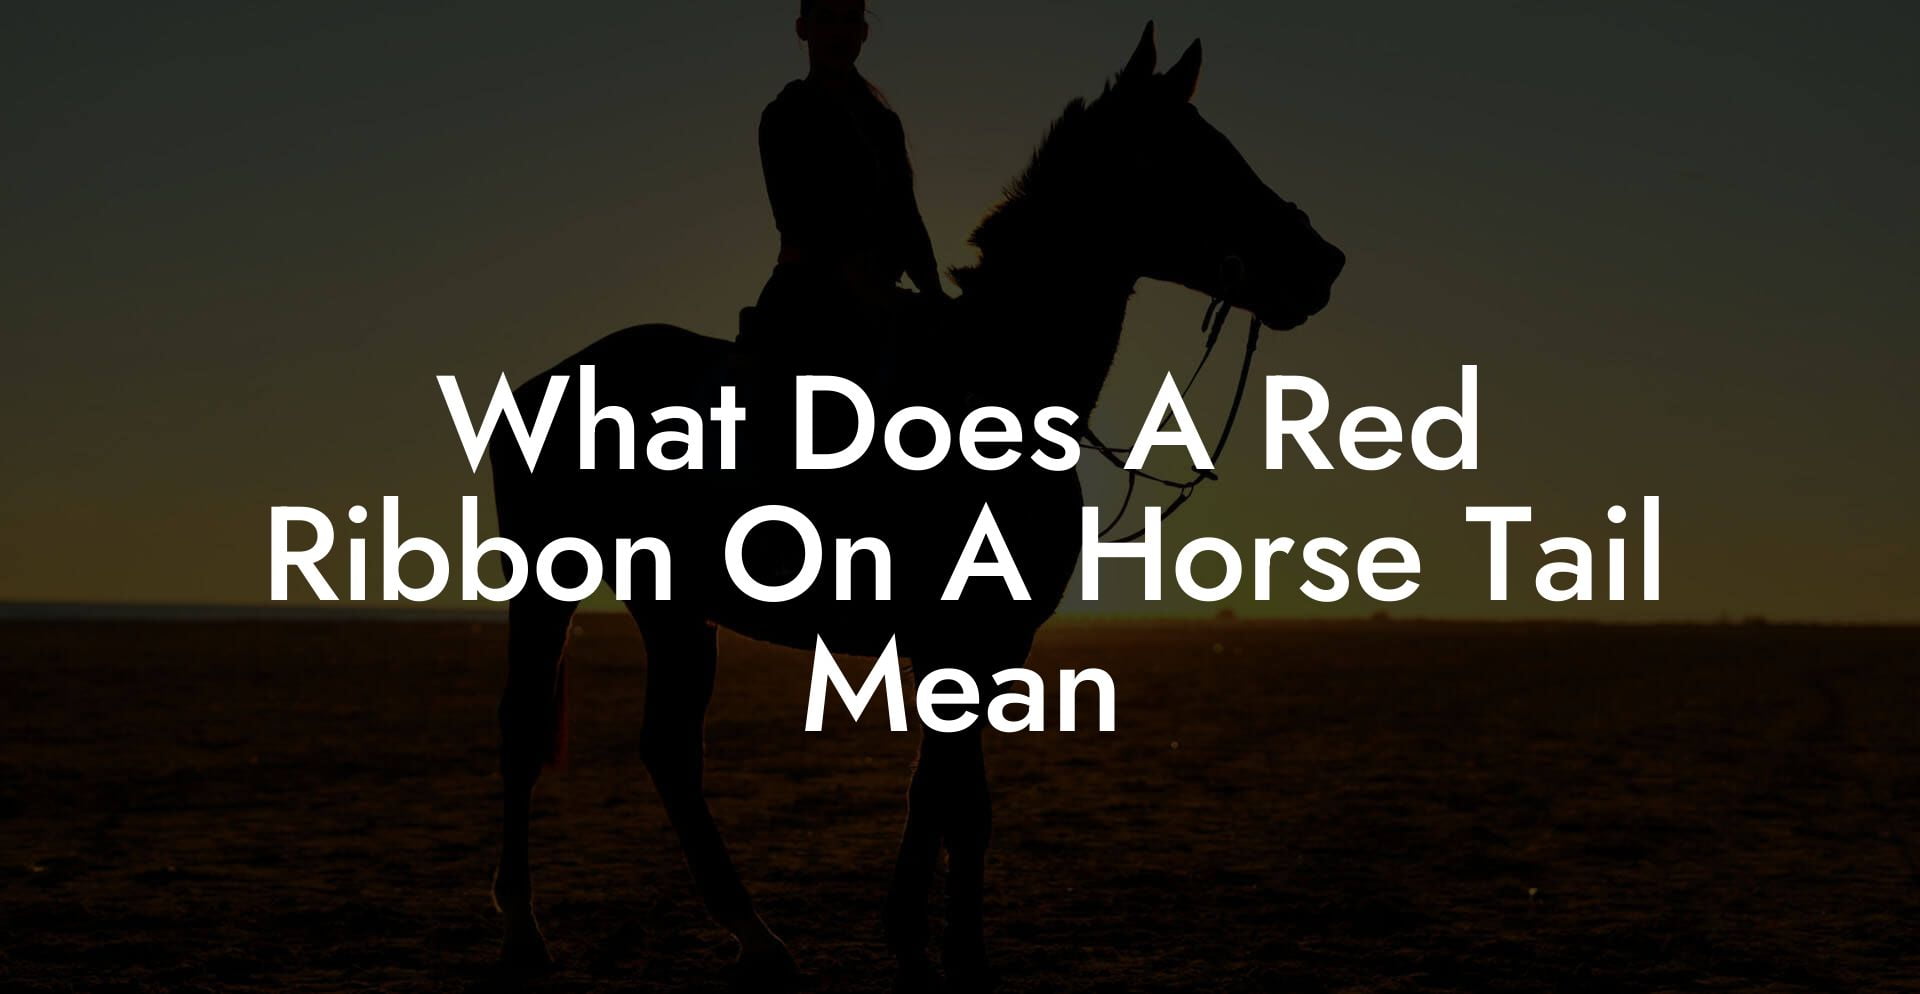 What Does A Red Ribbon On A Horse Tail Mean